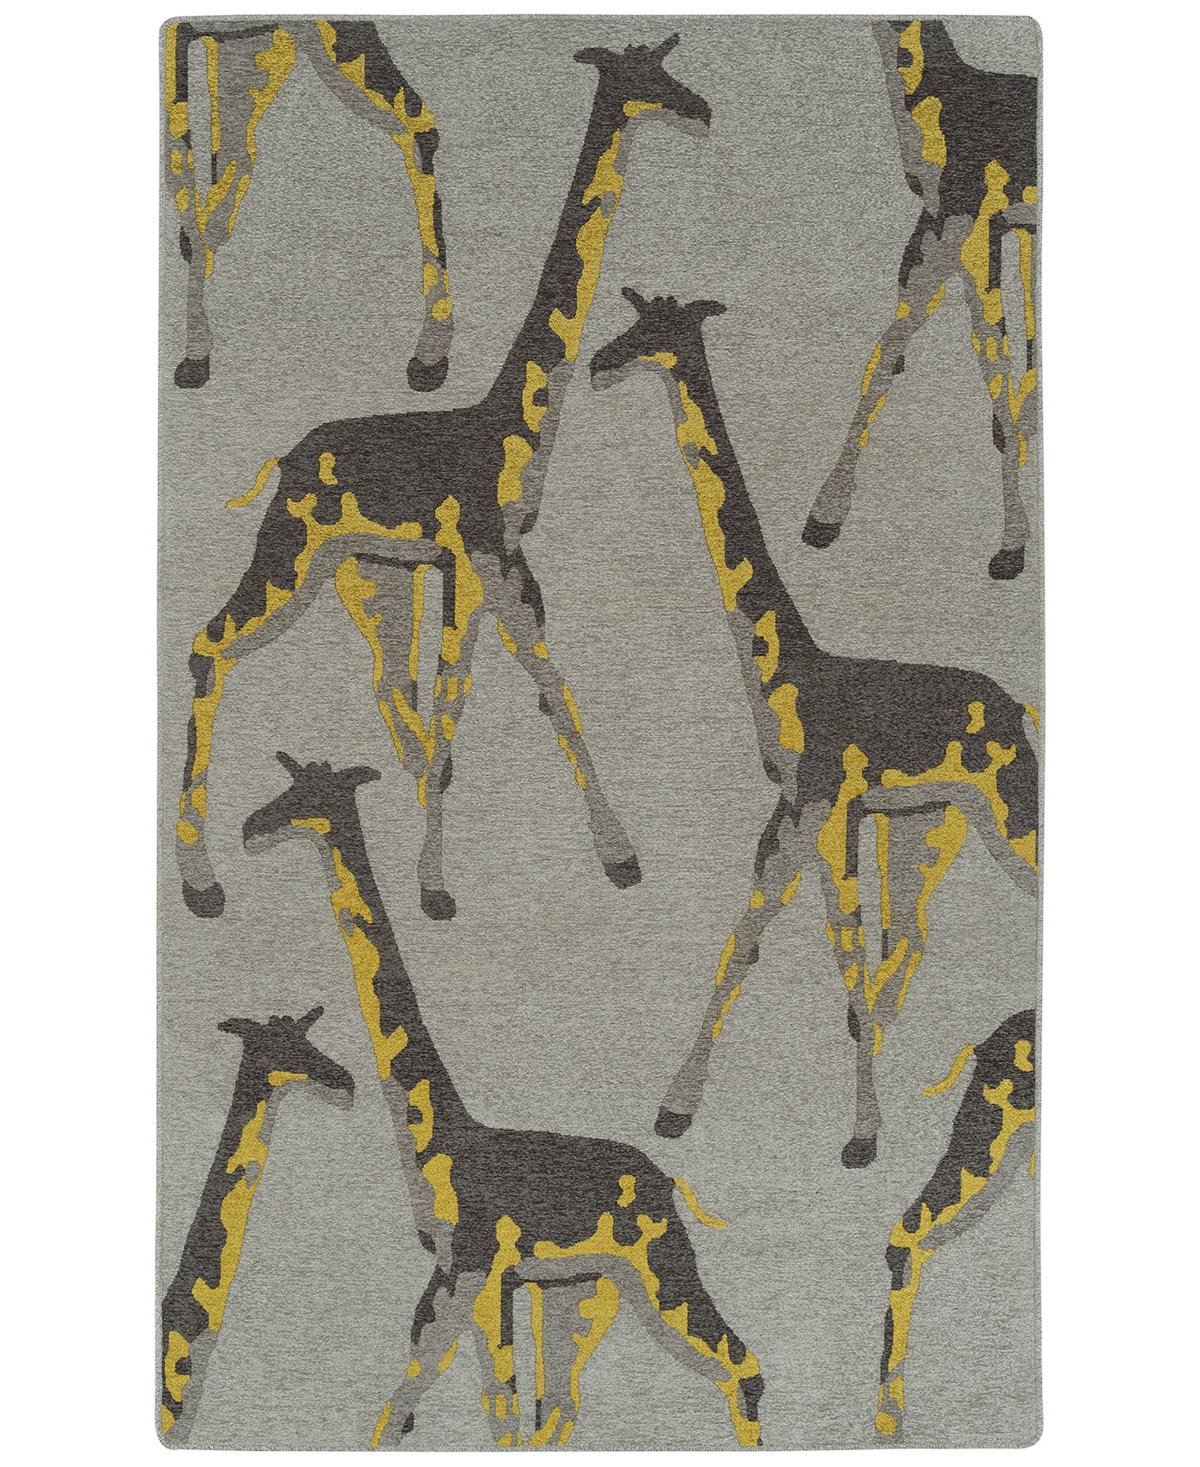 Hilary Farr Forever Fauna Hfa01-75 2' X 3' Area Rug In Charcoal